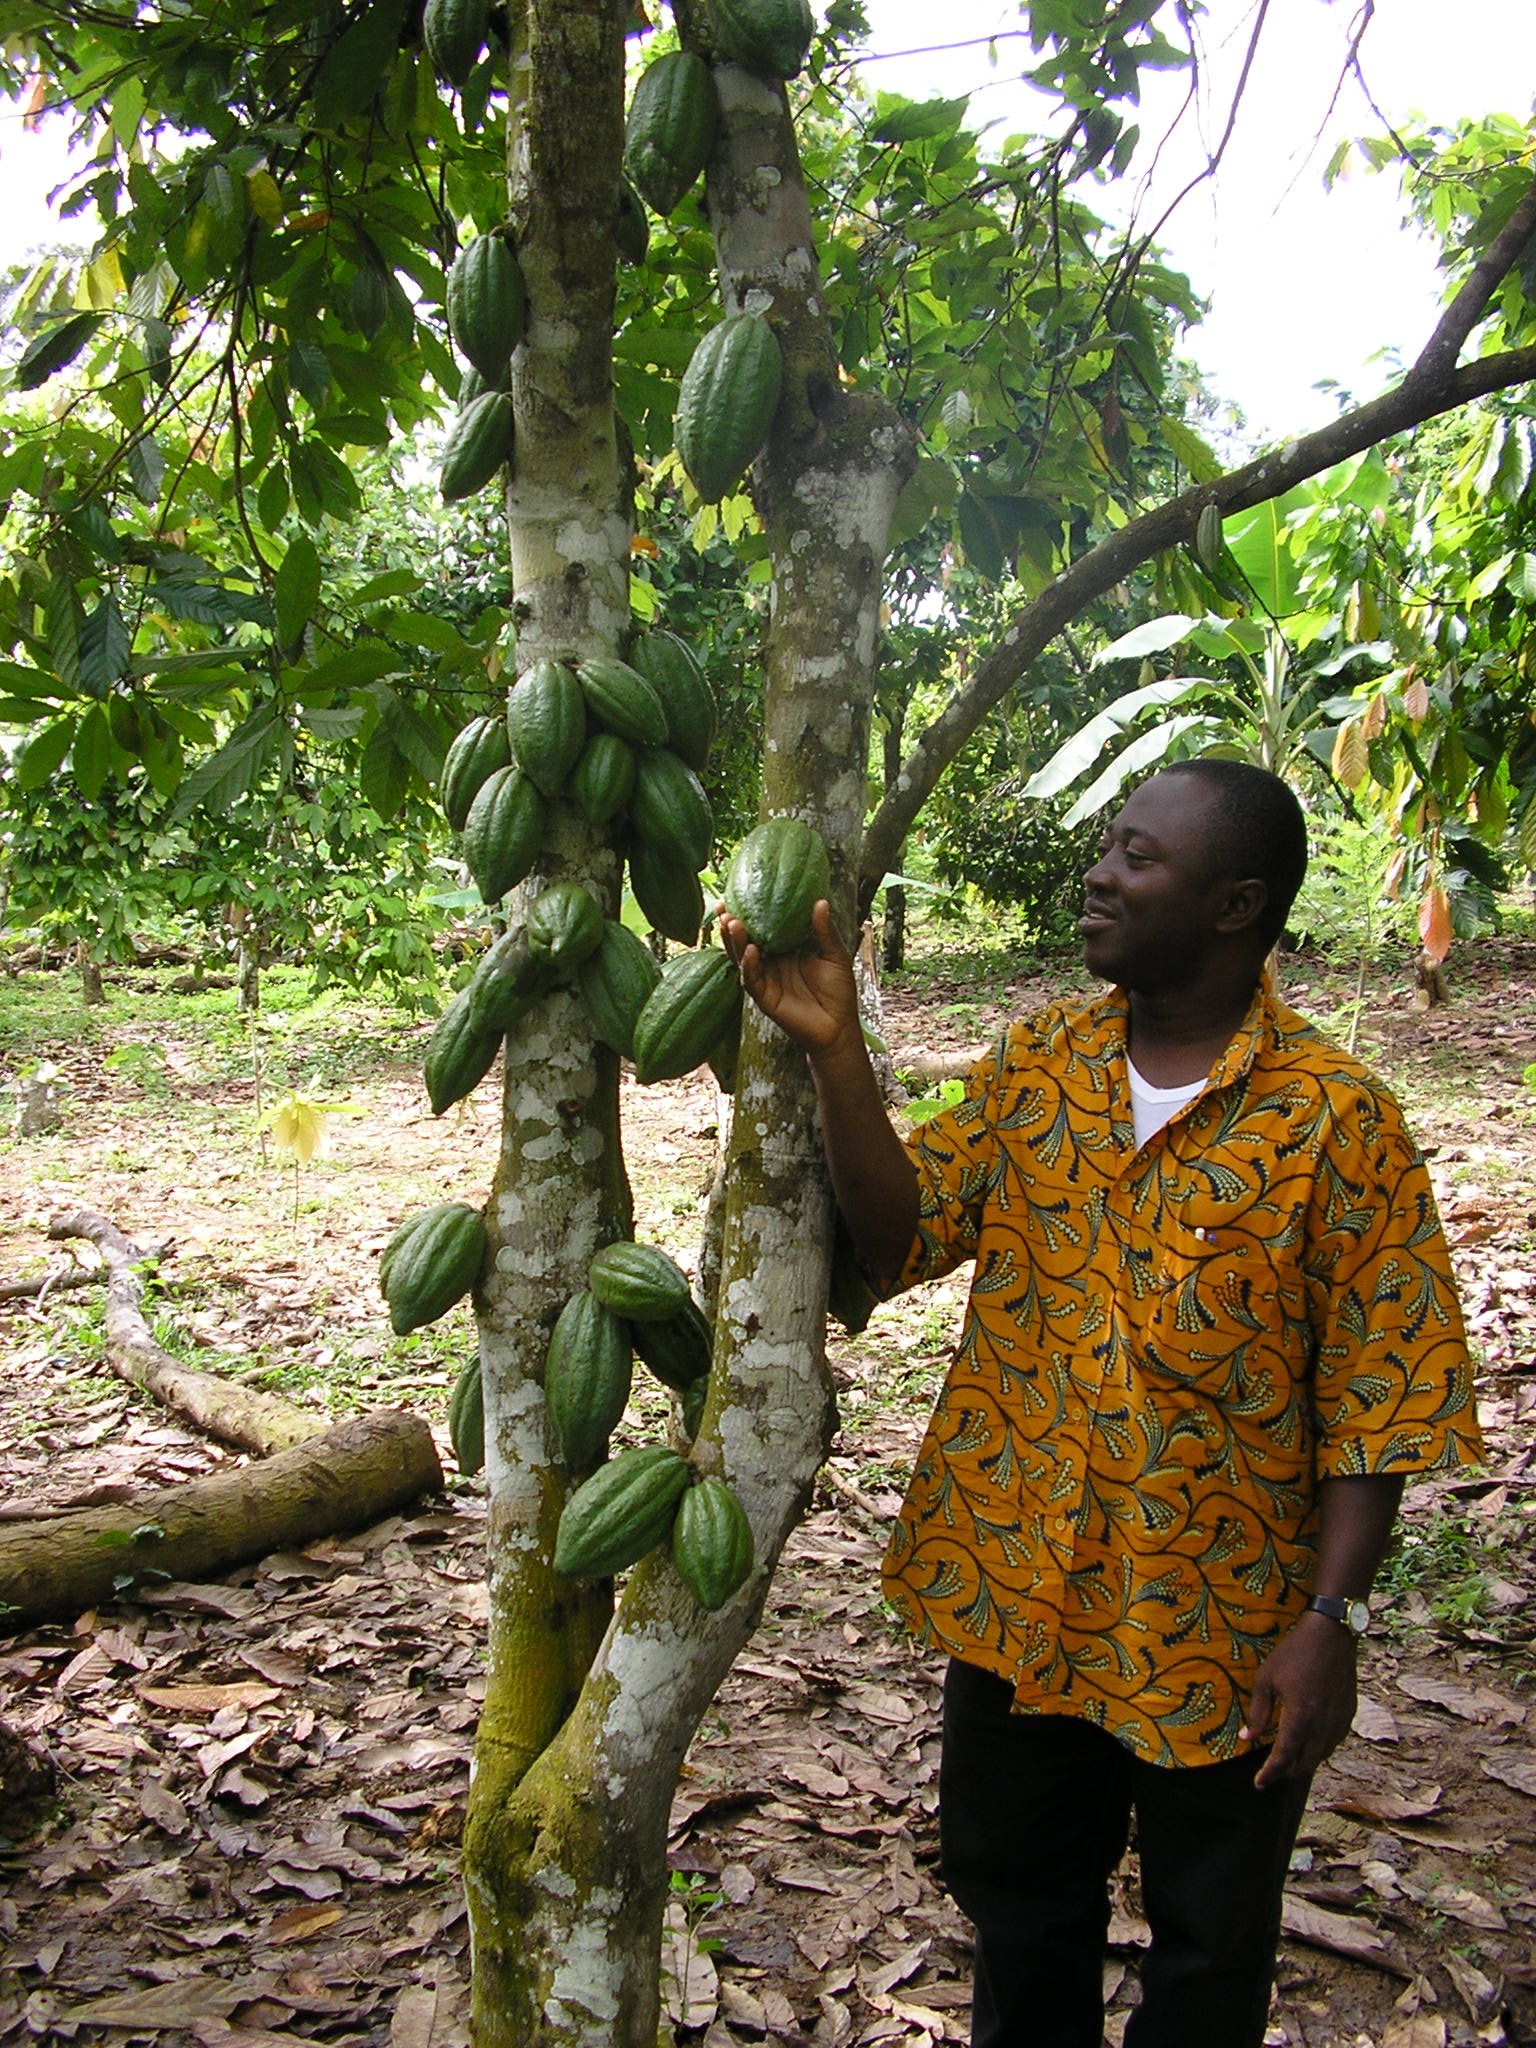 Cacao trees can live to be 200 years old, but they produce marketable cocoa beans for only 25 years.